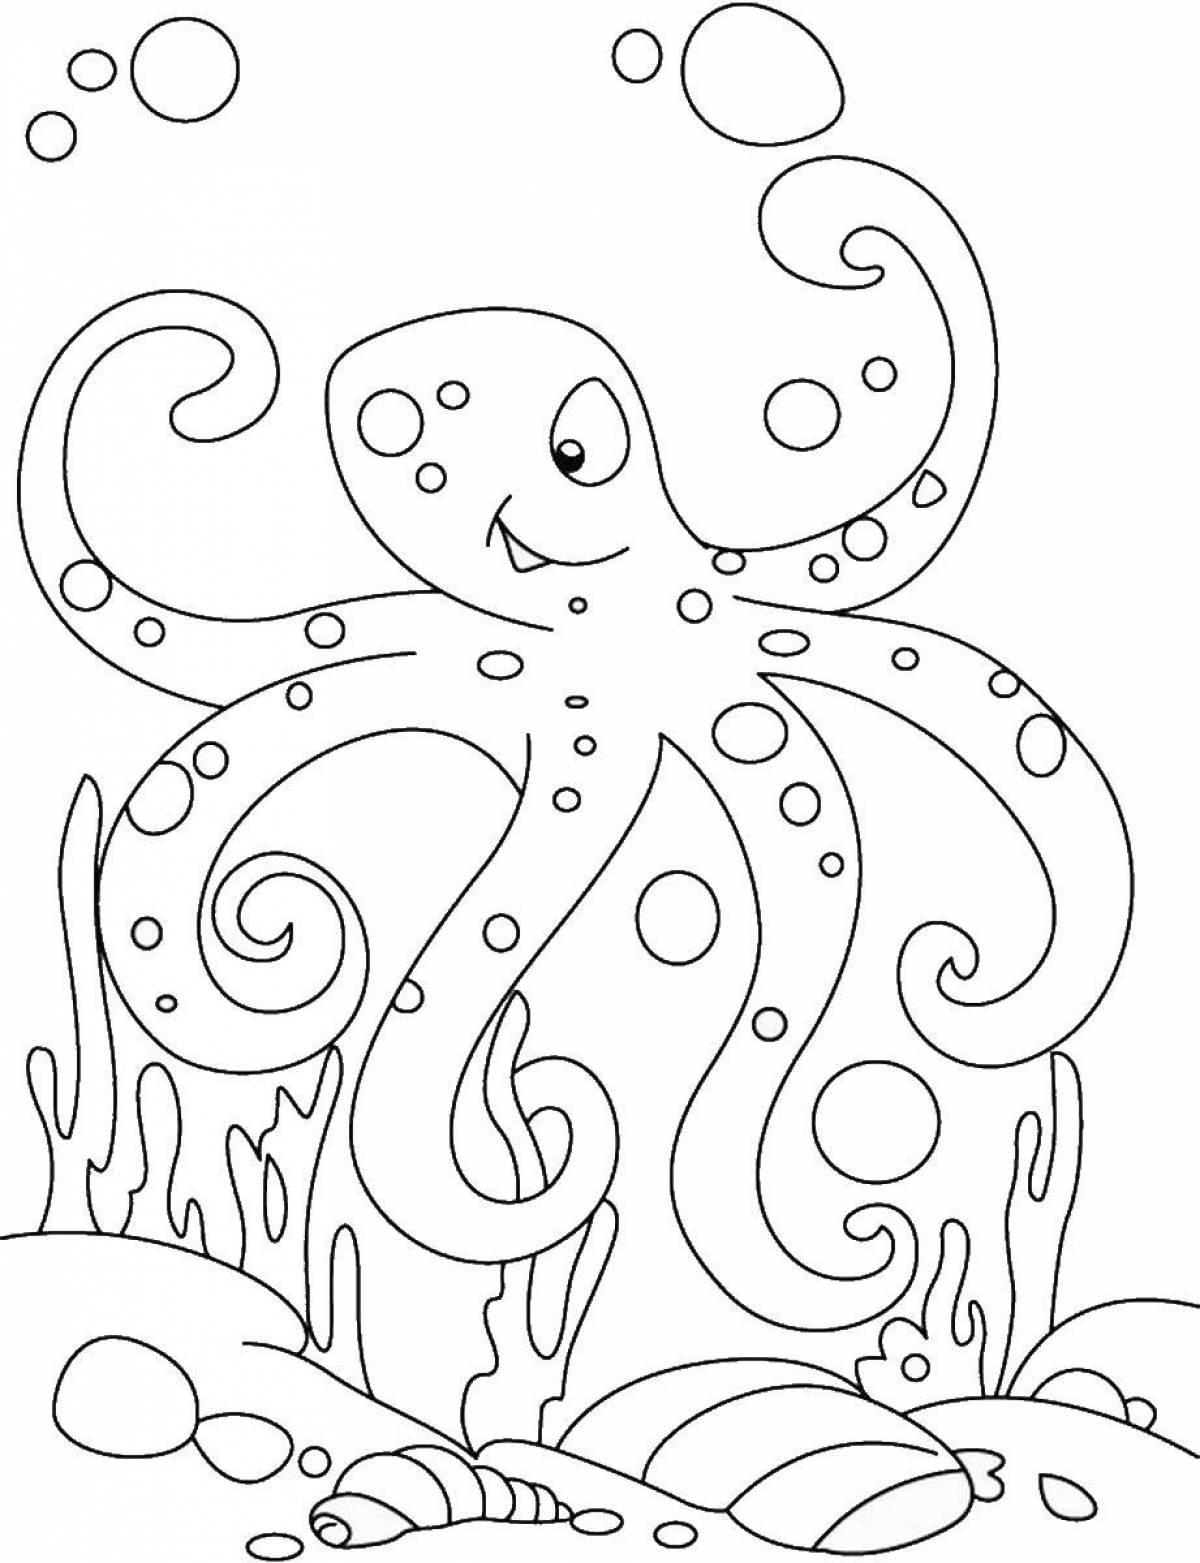 Coloring book happy octopus for kids